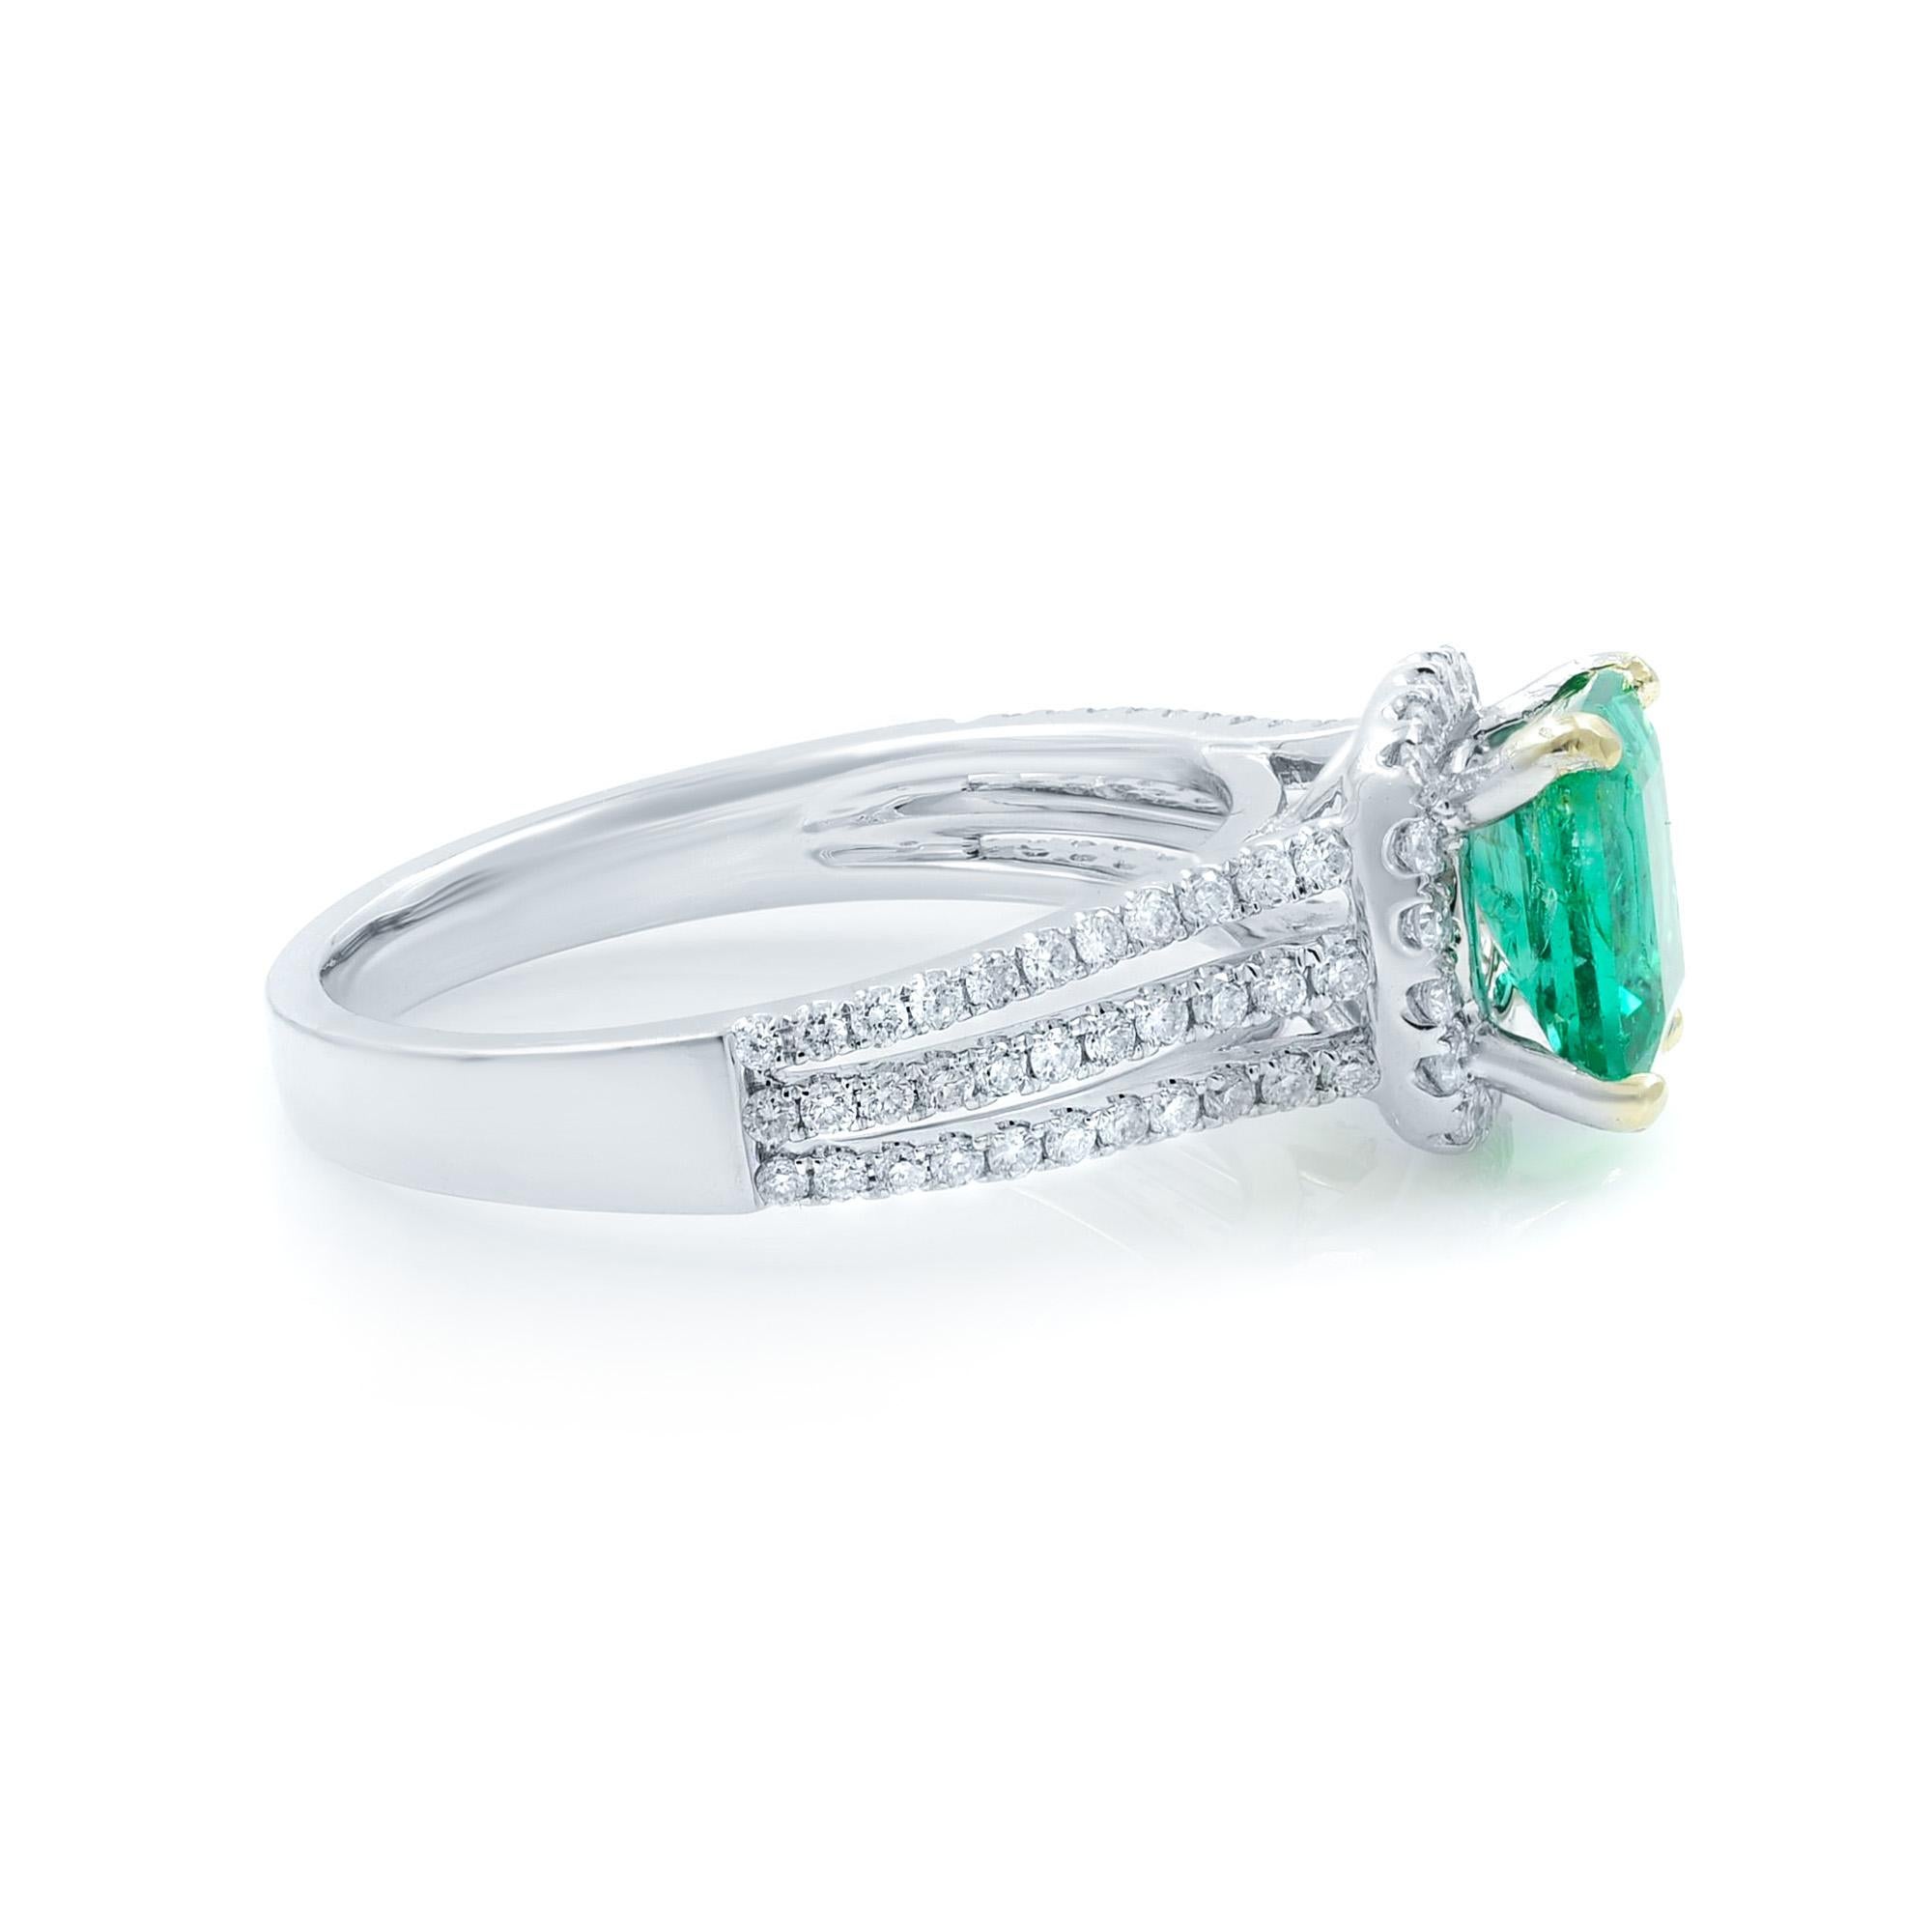 This gorgeous engagement ring features a Colombian emerald stone with a delicate diamond pave halo design. The ring is crafted in 18k white gold with a triple splint shank setting. The total carat weight of Colombian emerald is 1.00 and diamonds is